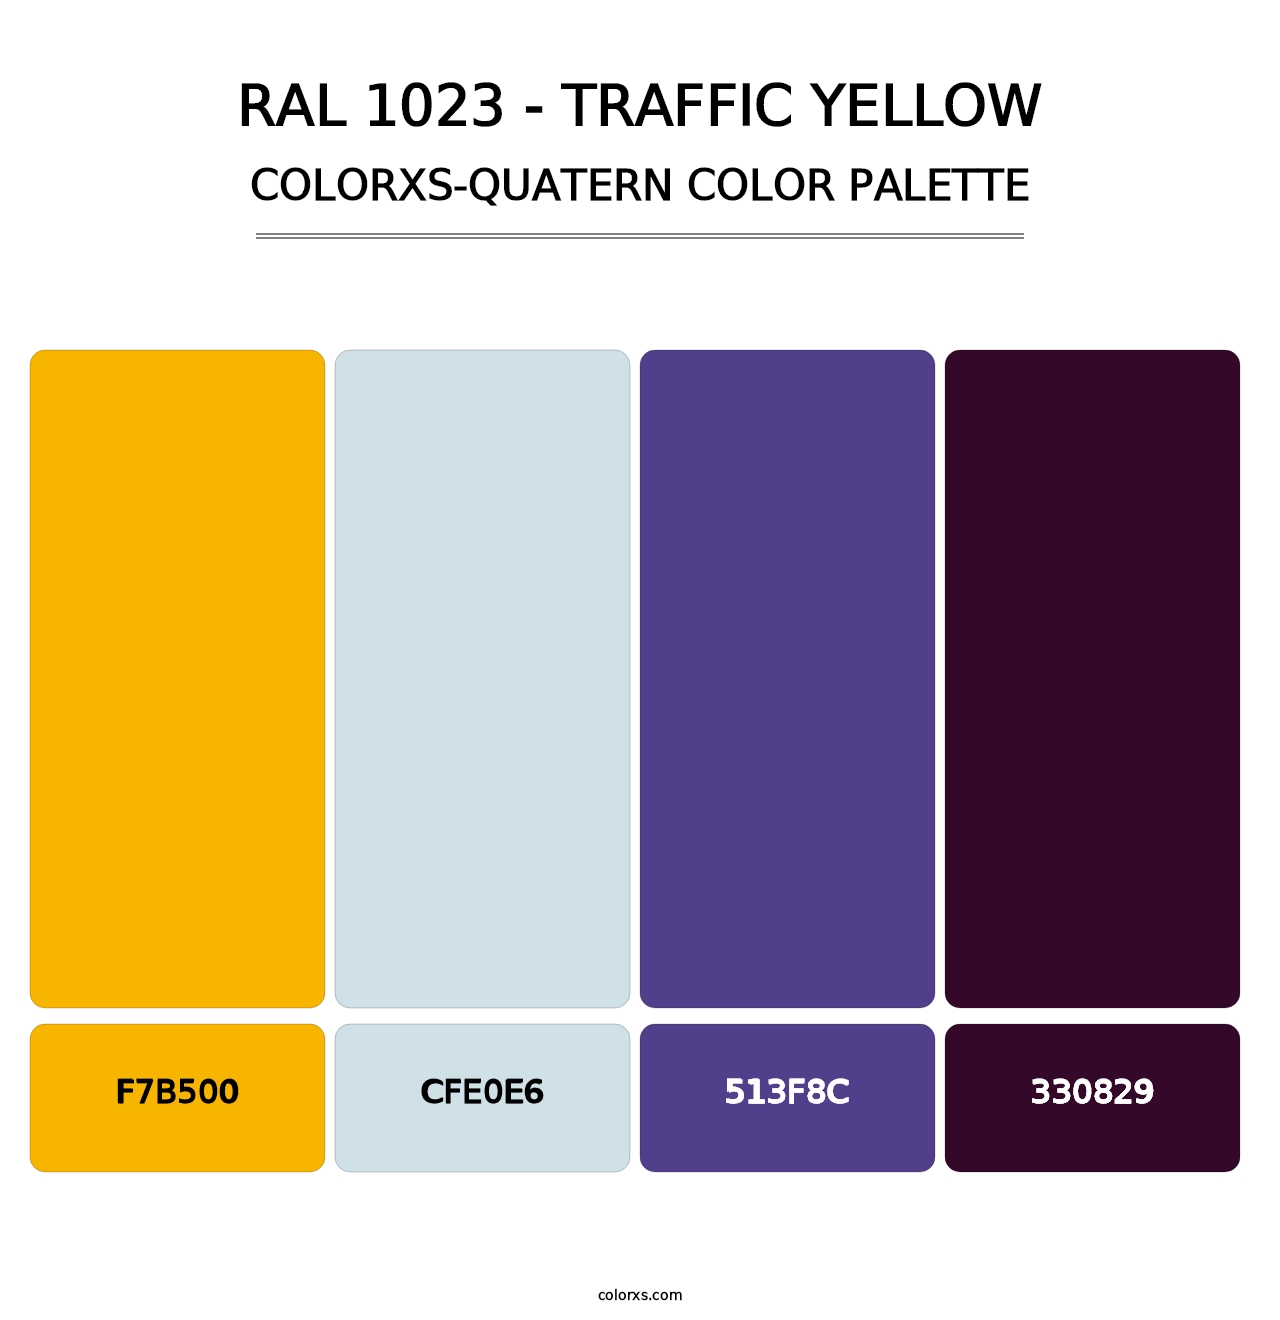 RAL 1023 - Traffic Yellow - Colorxs Quatern Palette